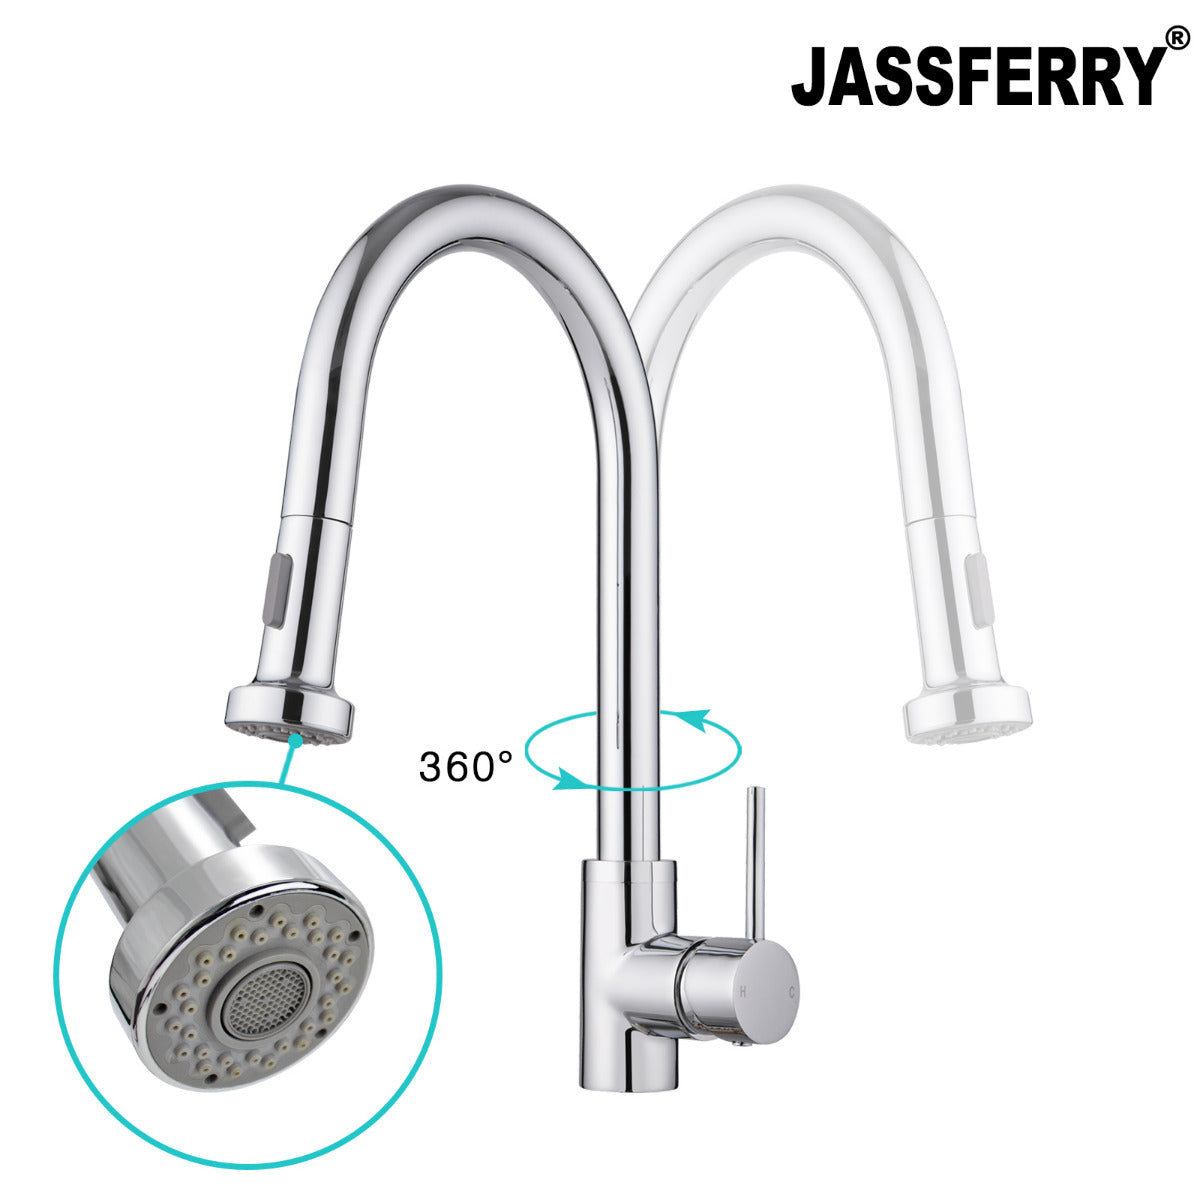 JassferryJASSFERRY Kitchen Sink Mixer Tap Pull Down Sprayer Pull Out Single Lever FaucetKitchen taps